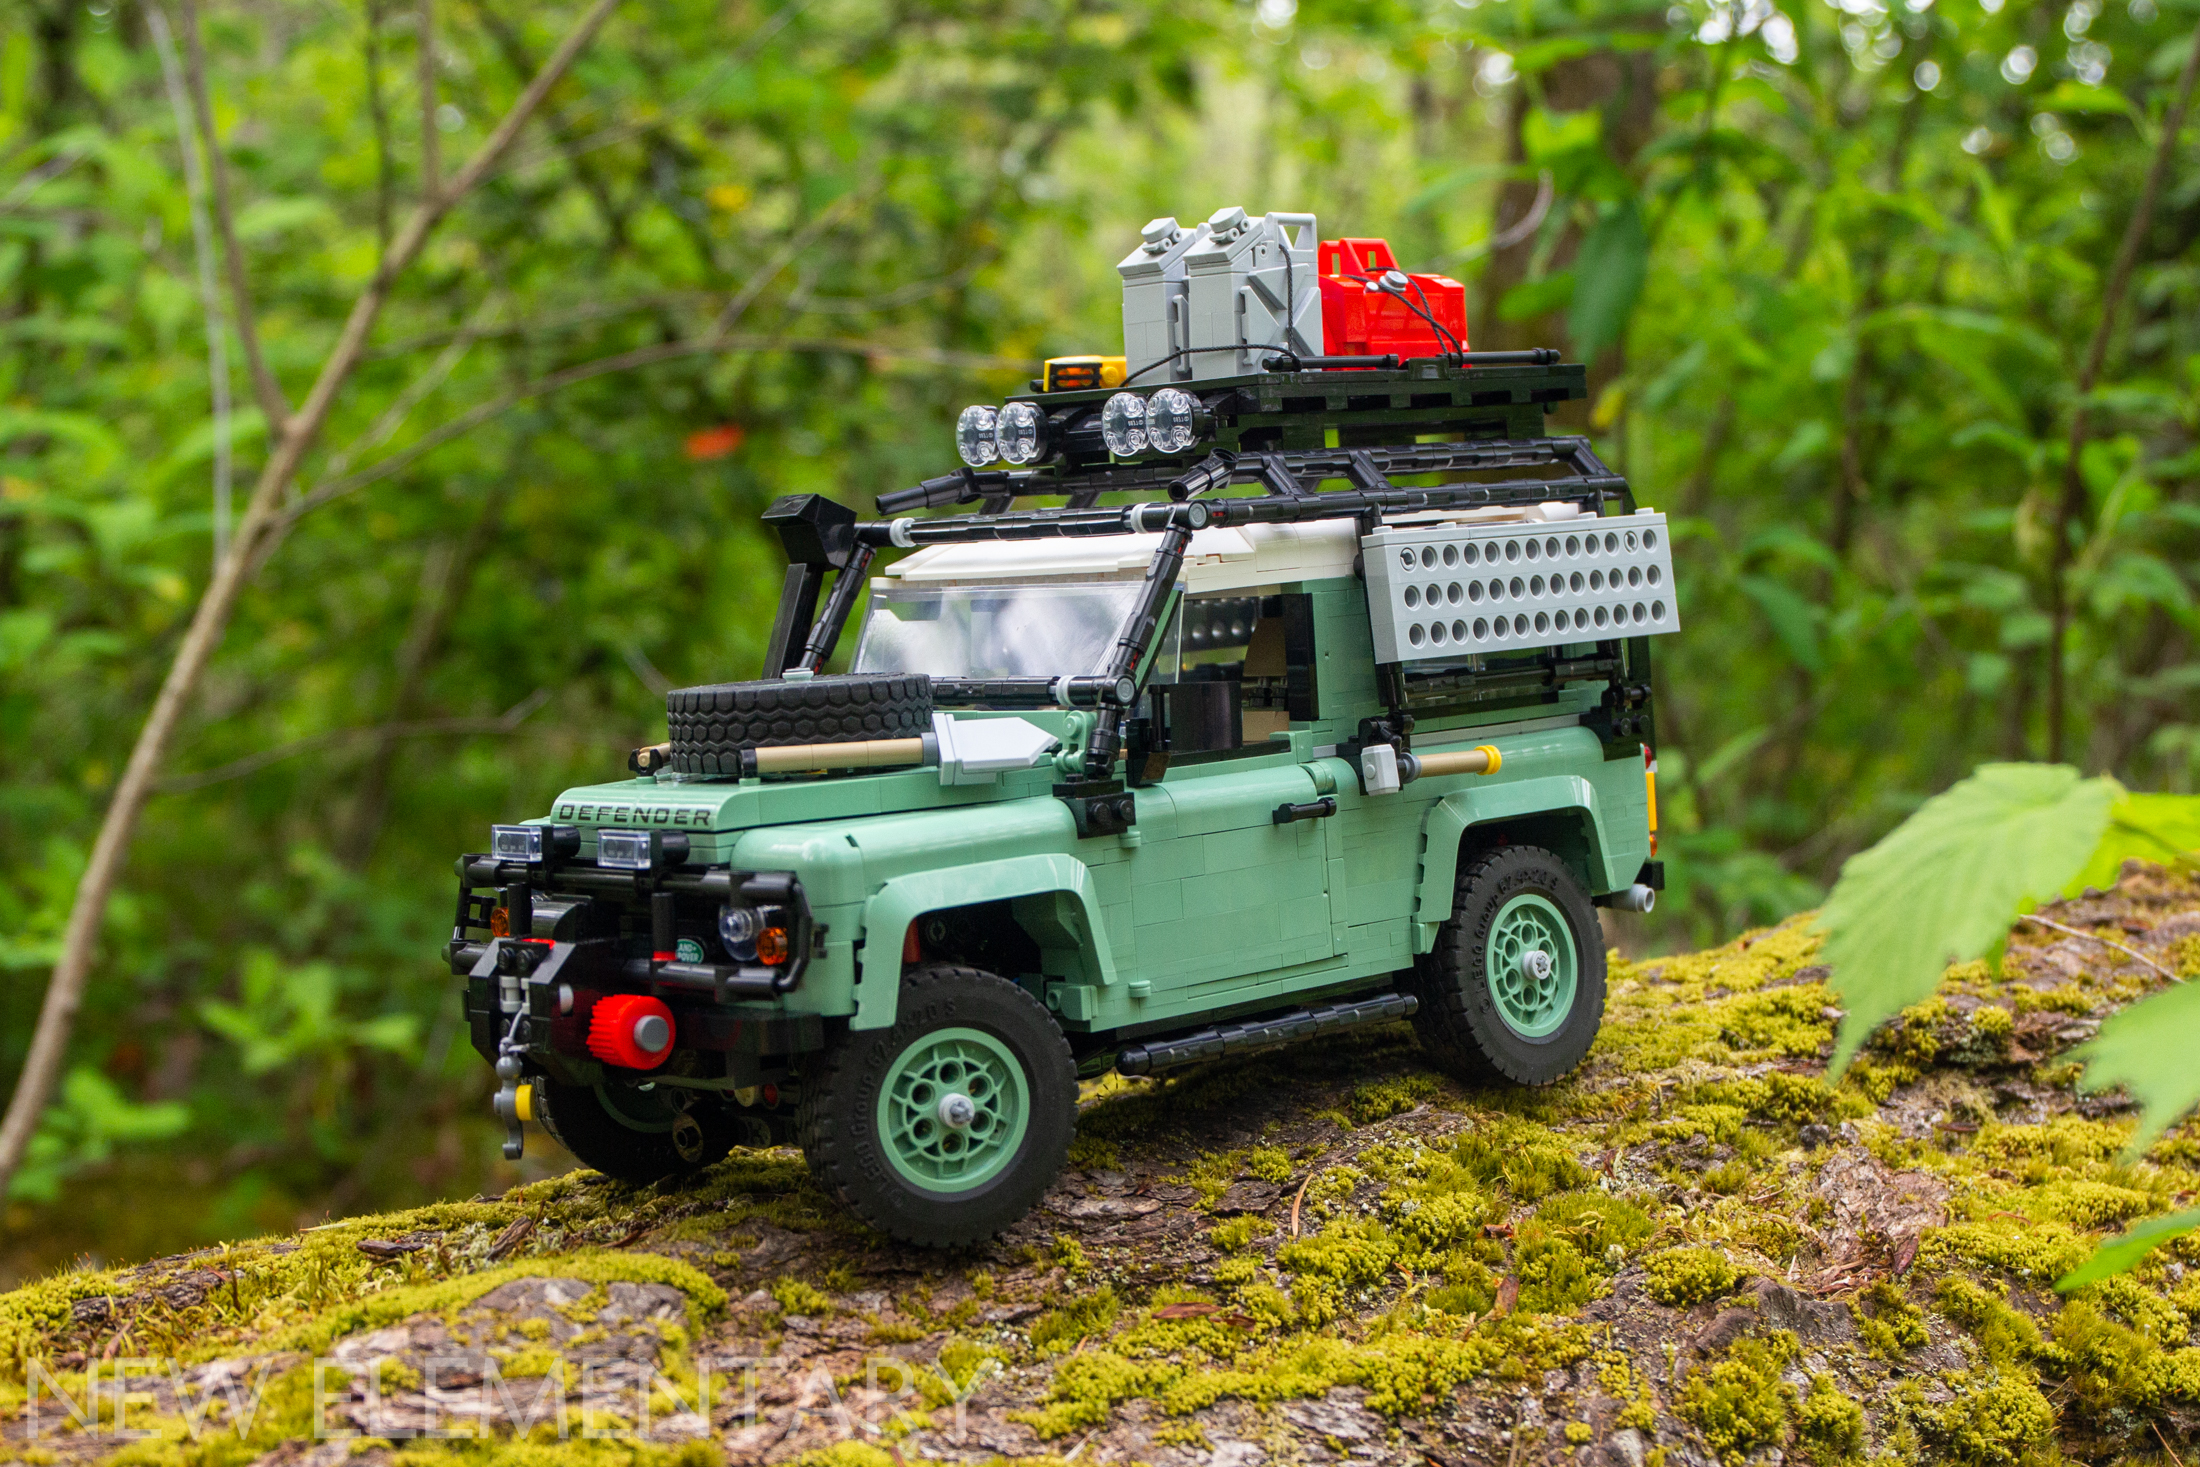 Modified & Custom Built Land Rover Defender - The landrovers